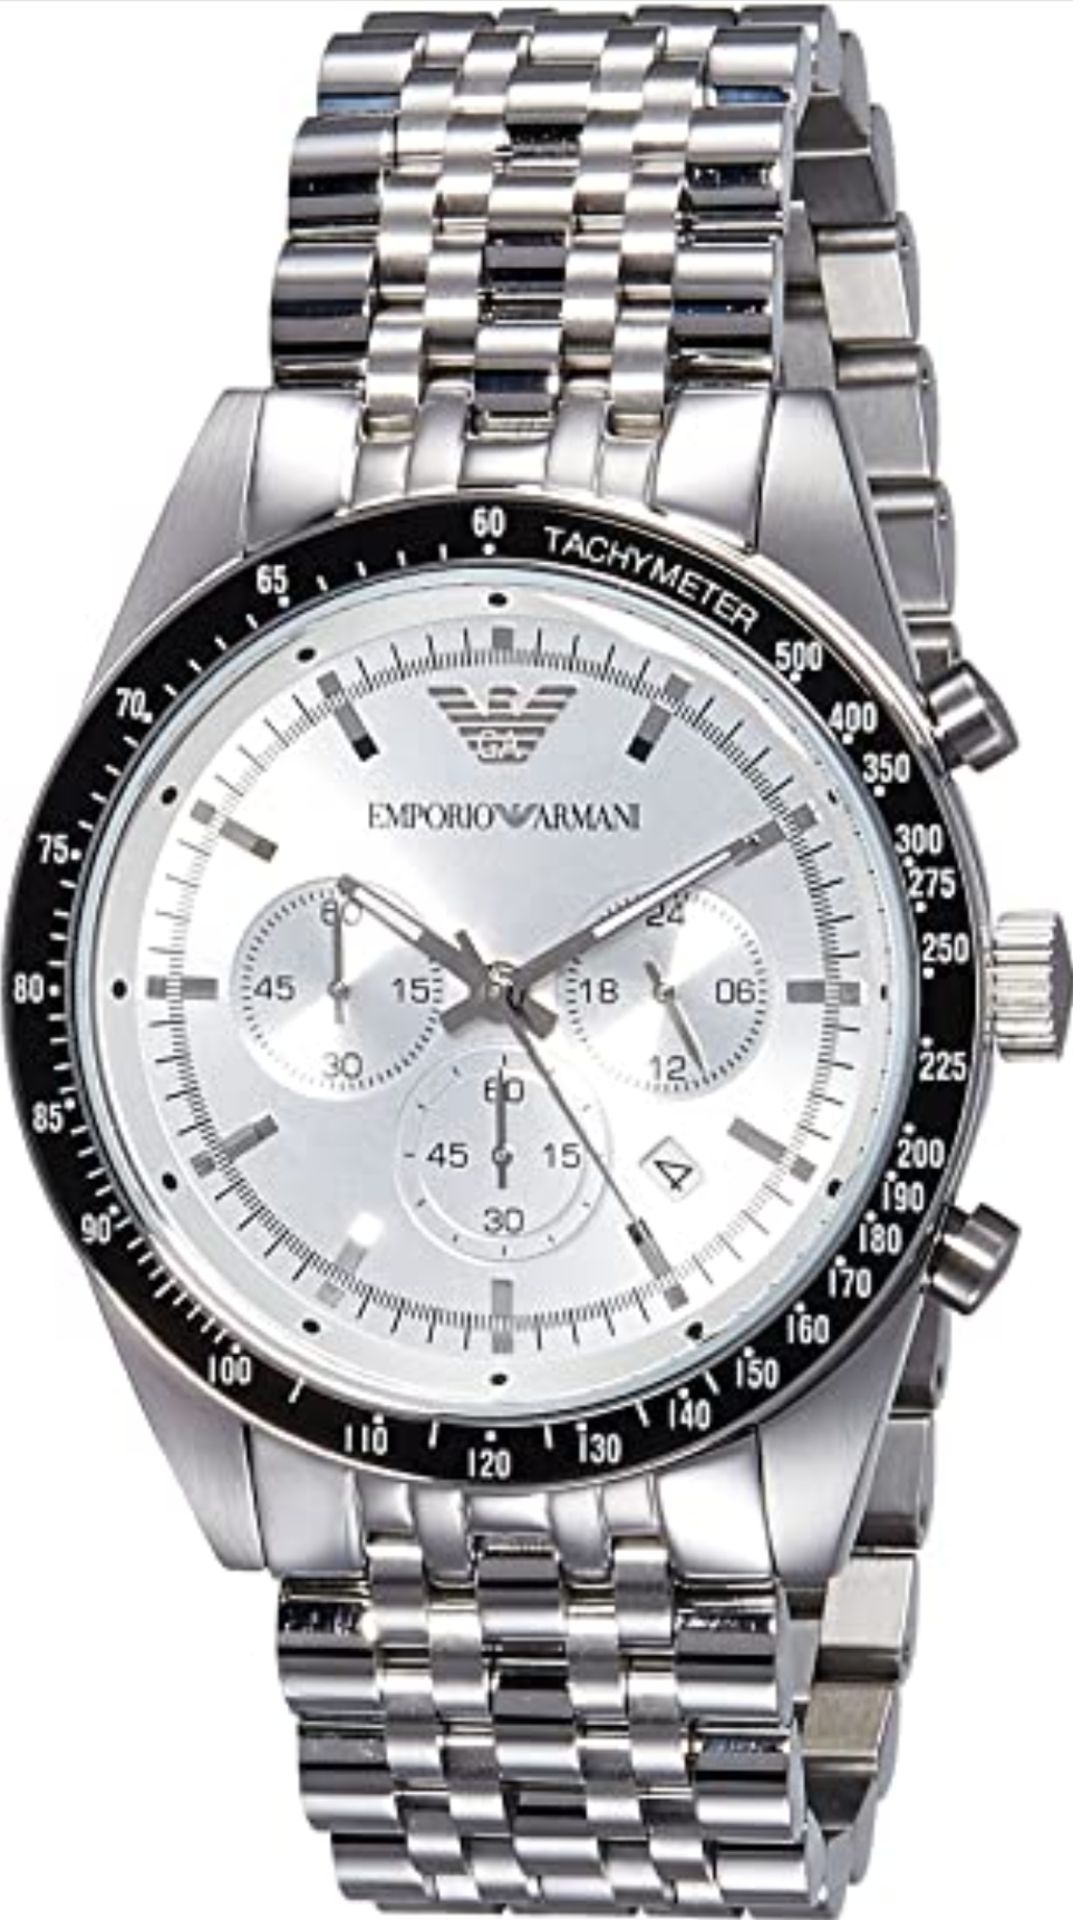 AR6073 Emporio Armani Men's Sportivo Silver Stainless Steel Chronograph Watch - Image 6 of 8